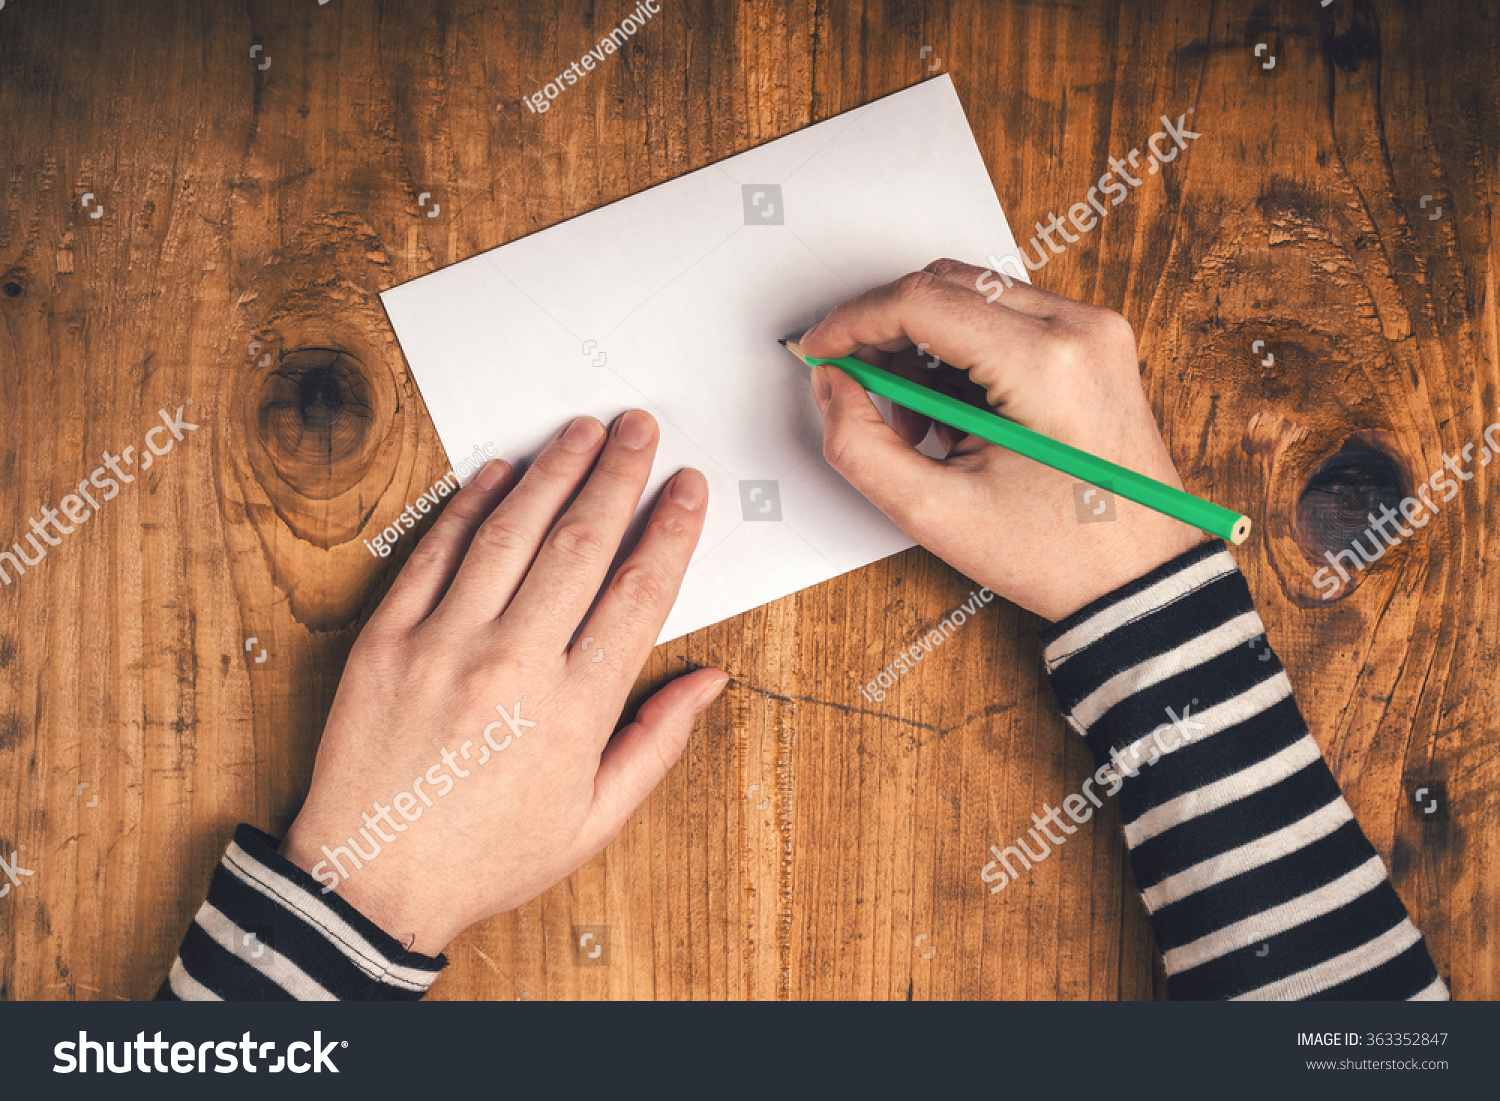 Woman writing recipient address on mailing envelope, female hands from above on office desk sending letter, top view, retro toned. #363352847